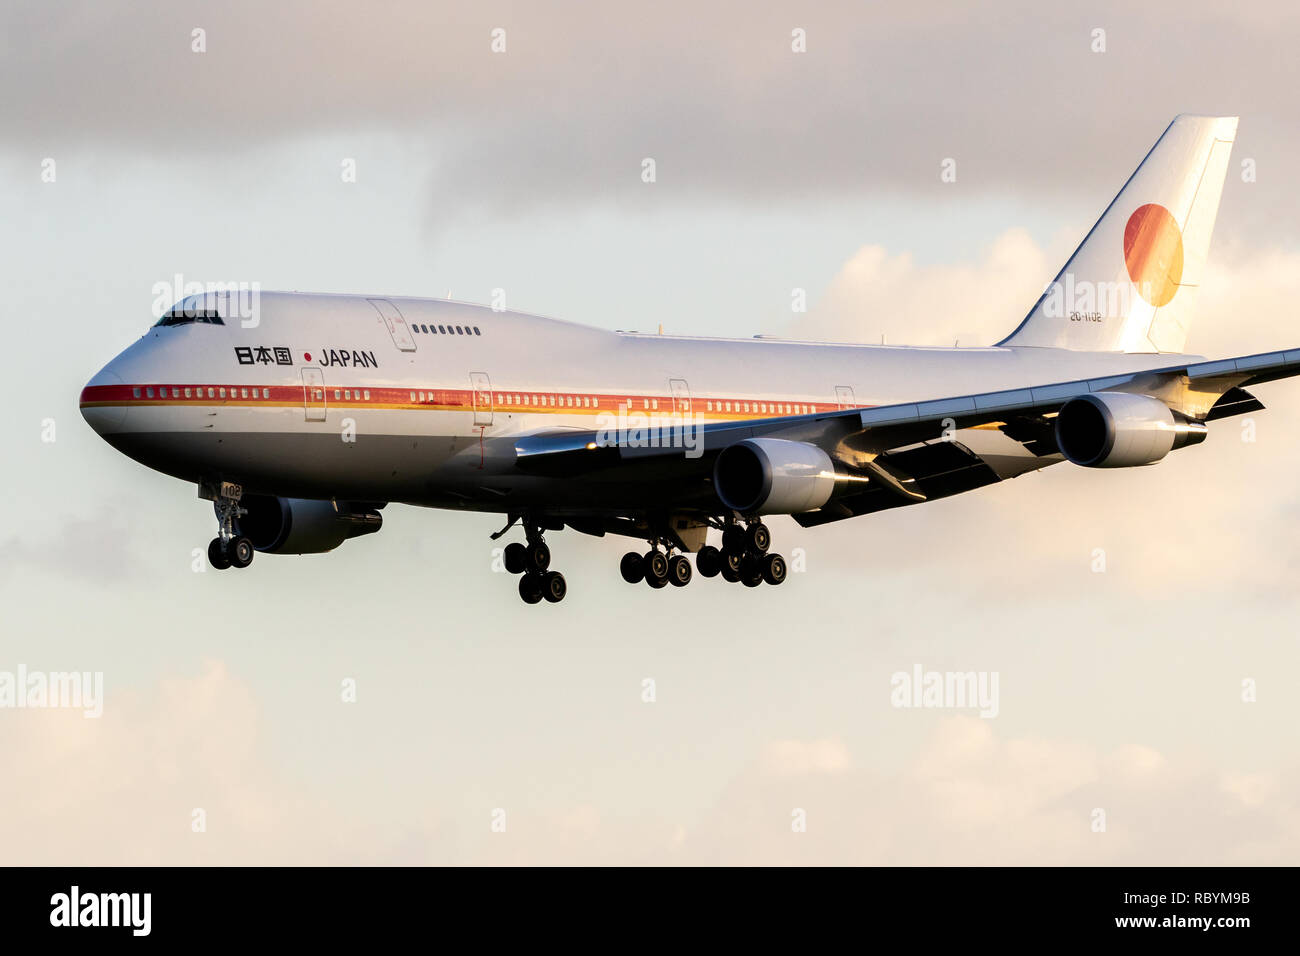 AMSTERDAM, THE NETHERLANDS - JAN 9, 2019: Japanese Air Force One Boeing 747 aircraft bringing the Prime Minister of Japan Shinzo Abe for a short visit Stock Photo